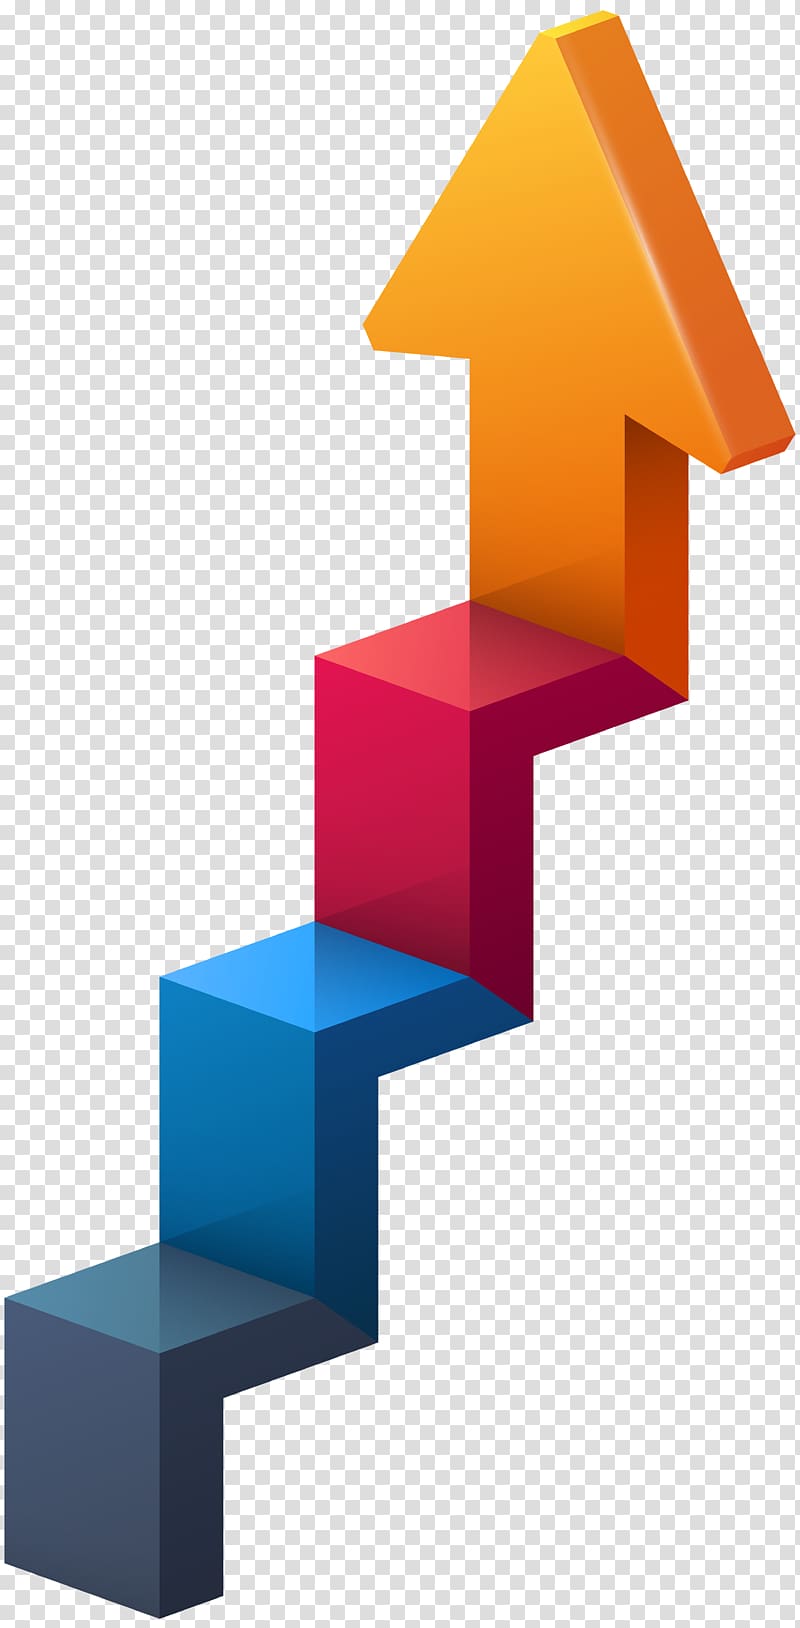 orange, pink, and blue arrow, file formats Lossless compression, Stairs Arrow transparent background PNG clipart